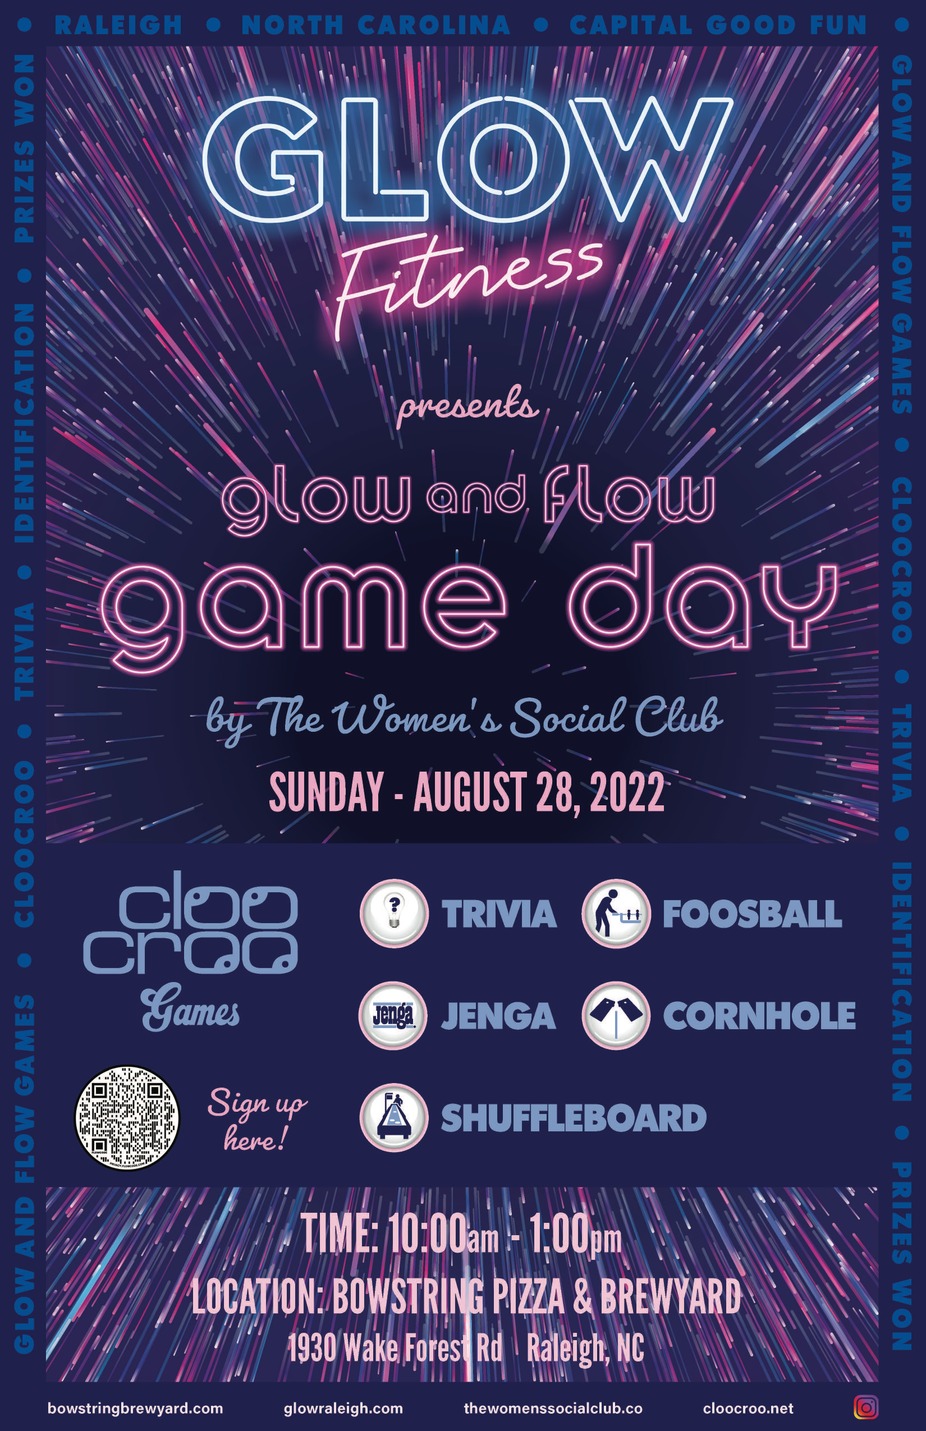 Glow and Flow Game Day event photo